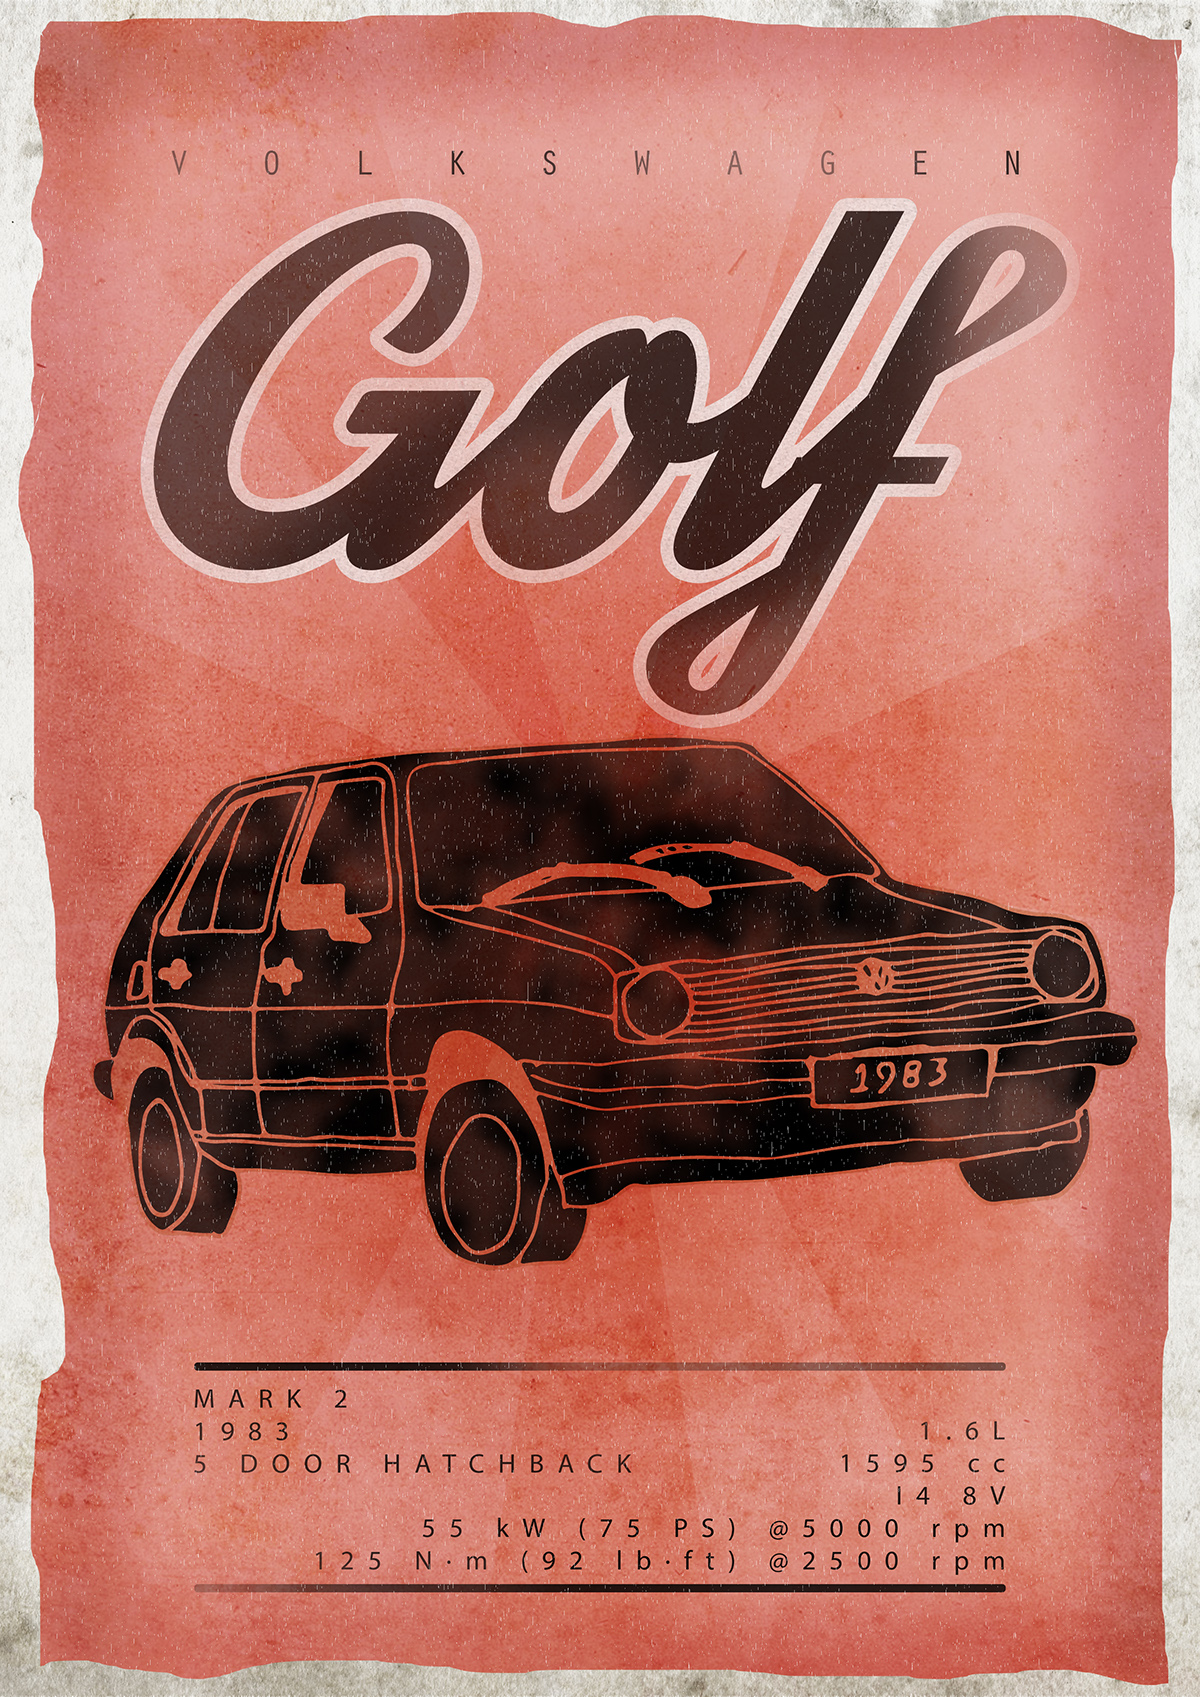 VW golf mark Two poster